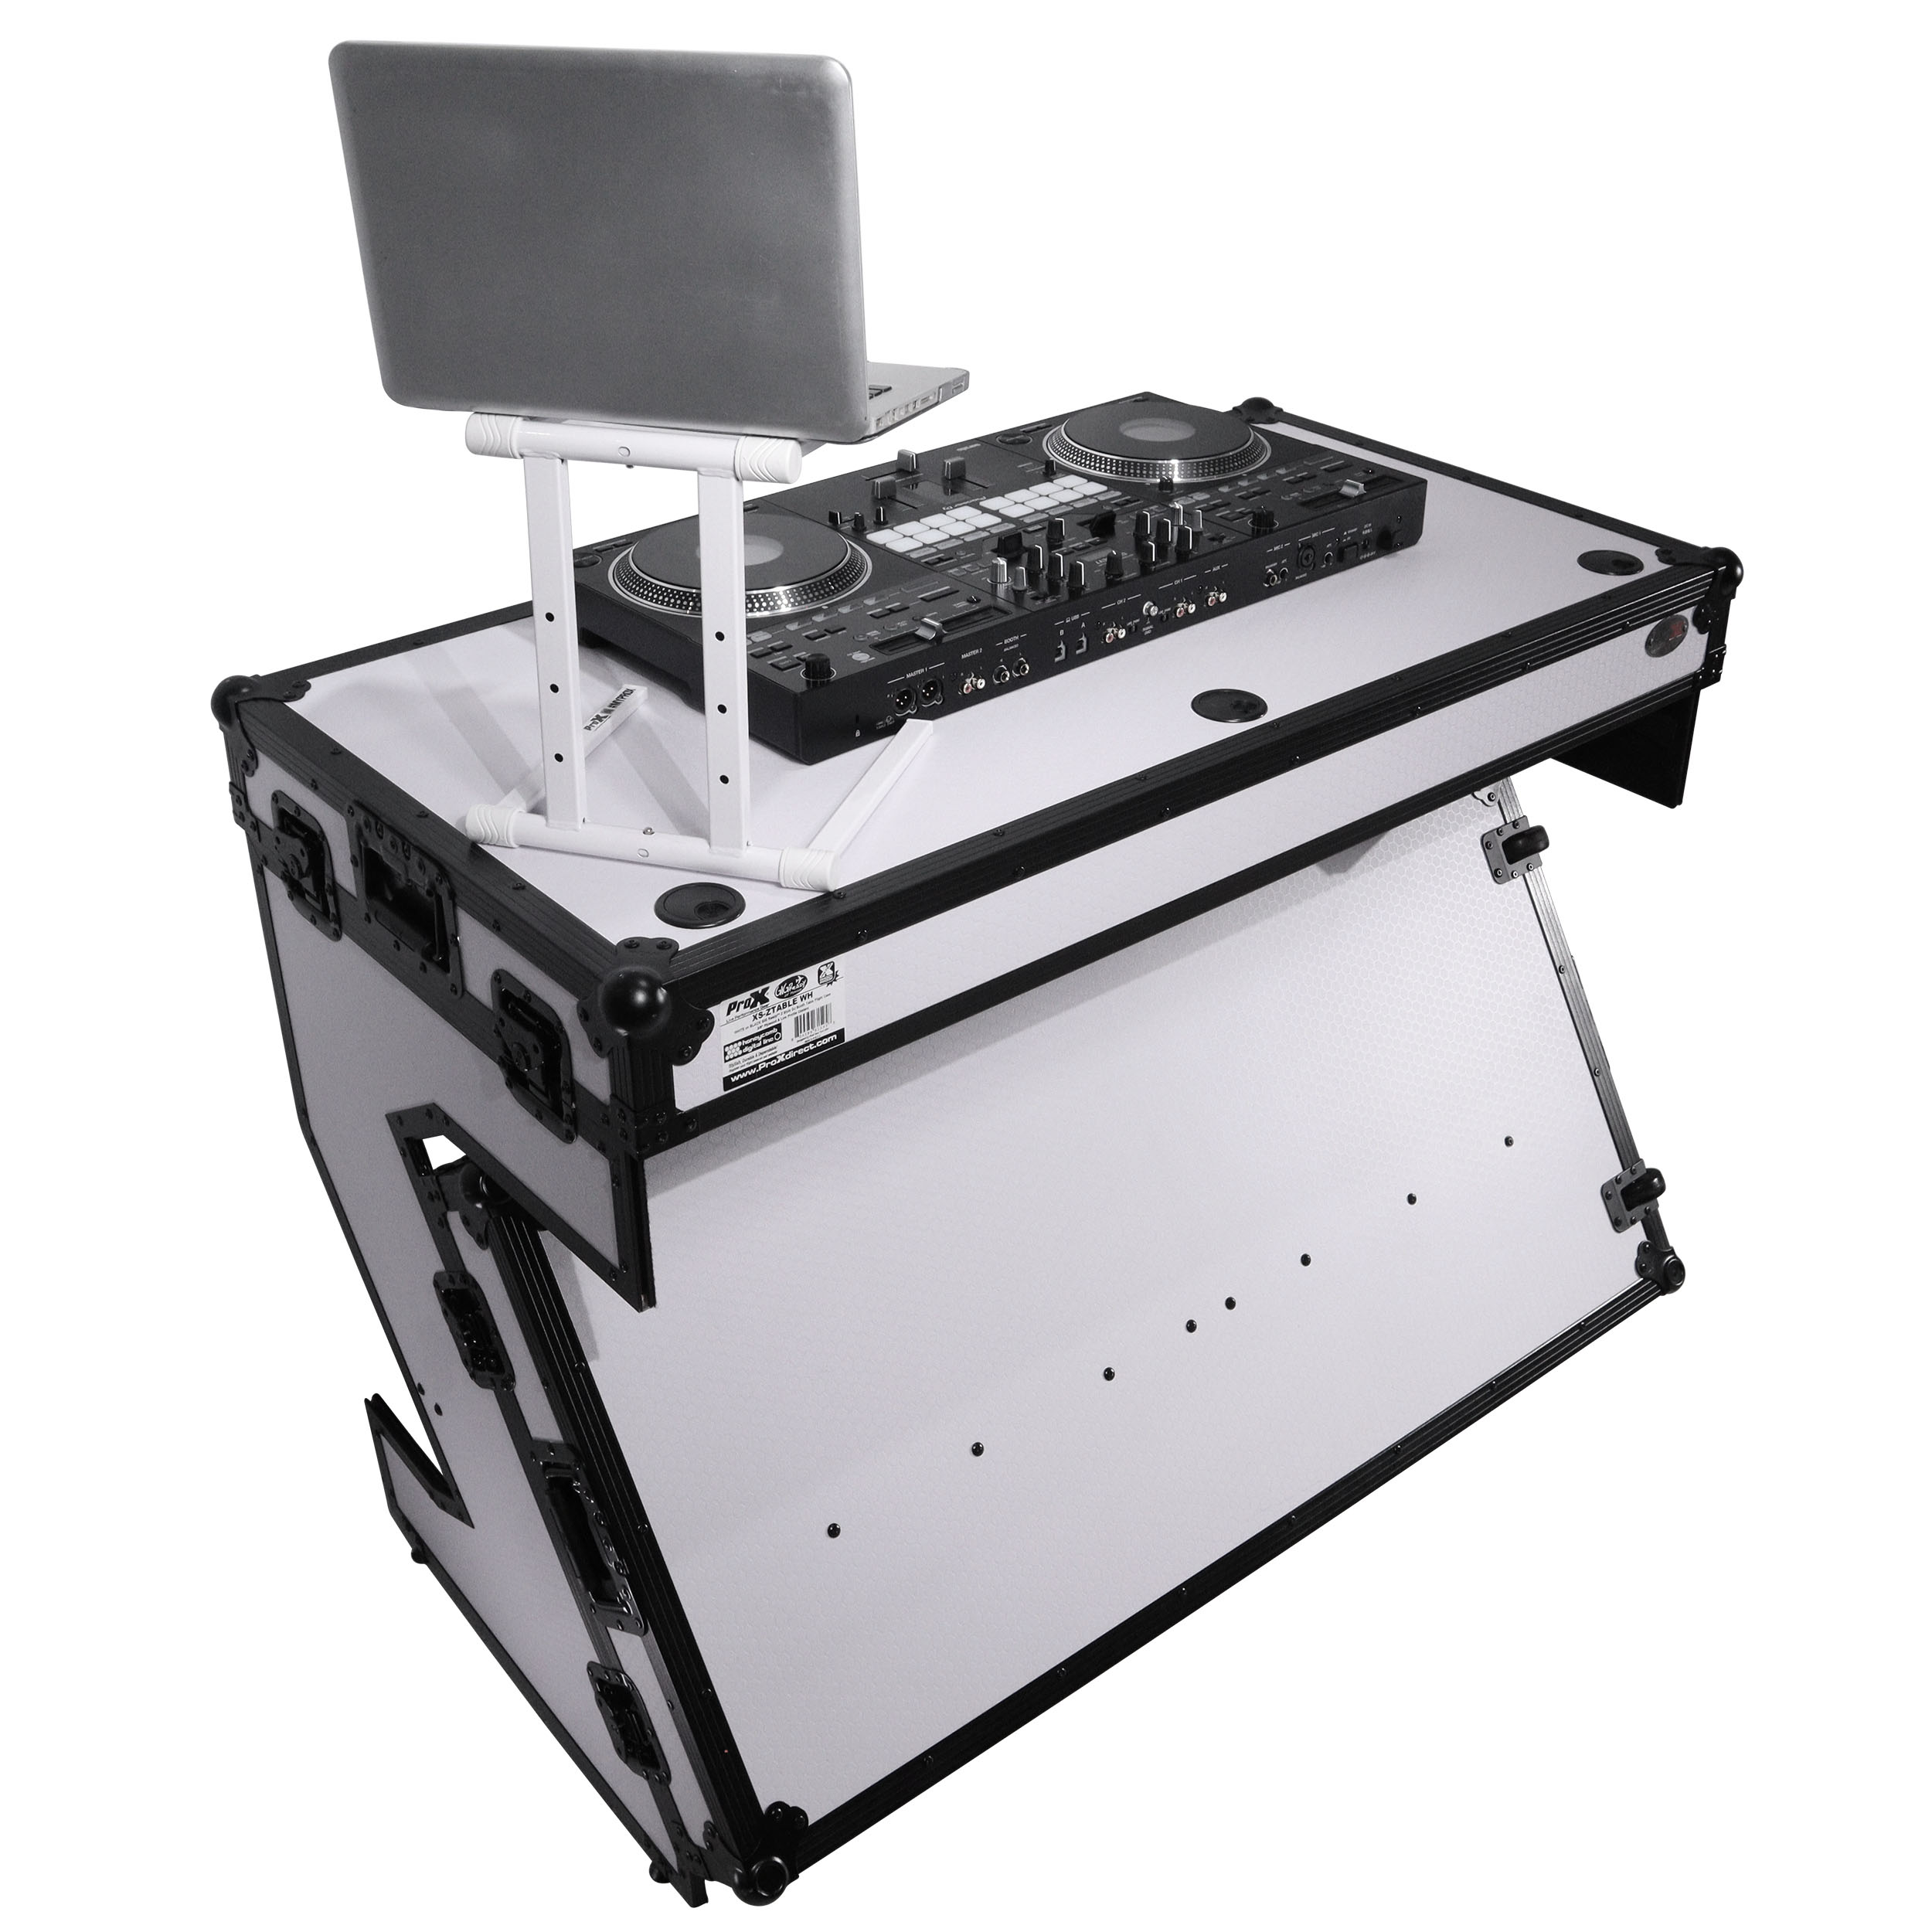 DJ Z-Table® Workstation | Flight Case Table Portable with Handles and Wheels Black and White Finish